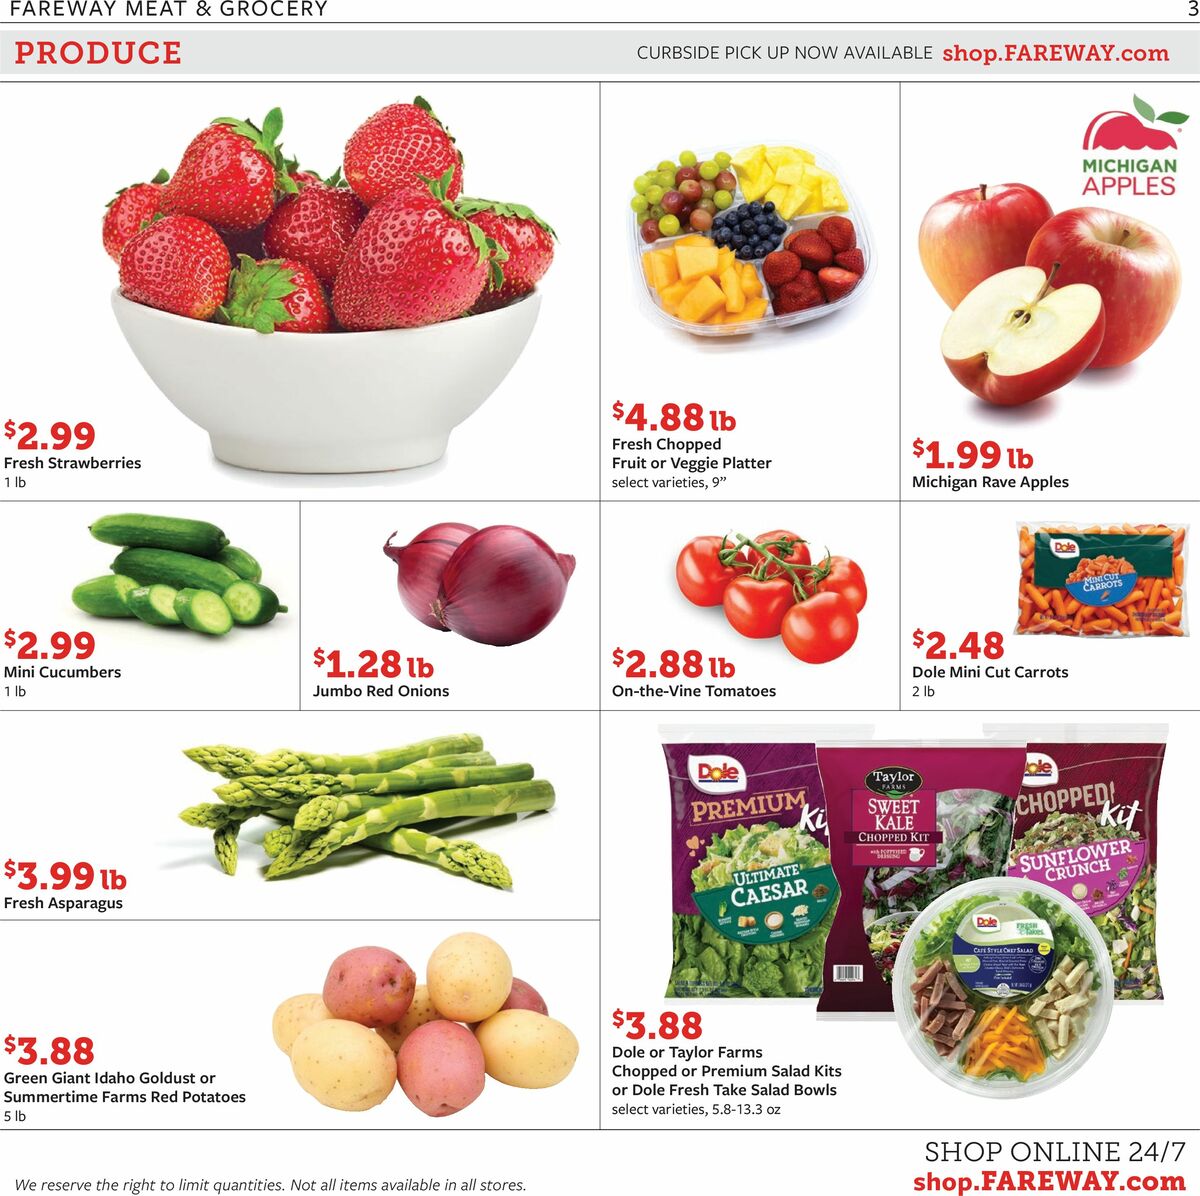 Fareway Weekly Ad from October 2